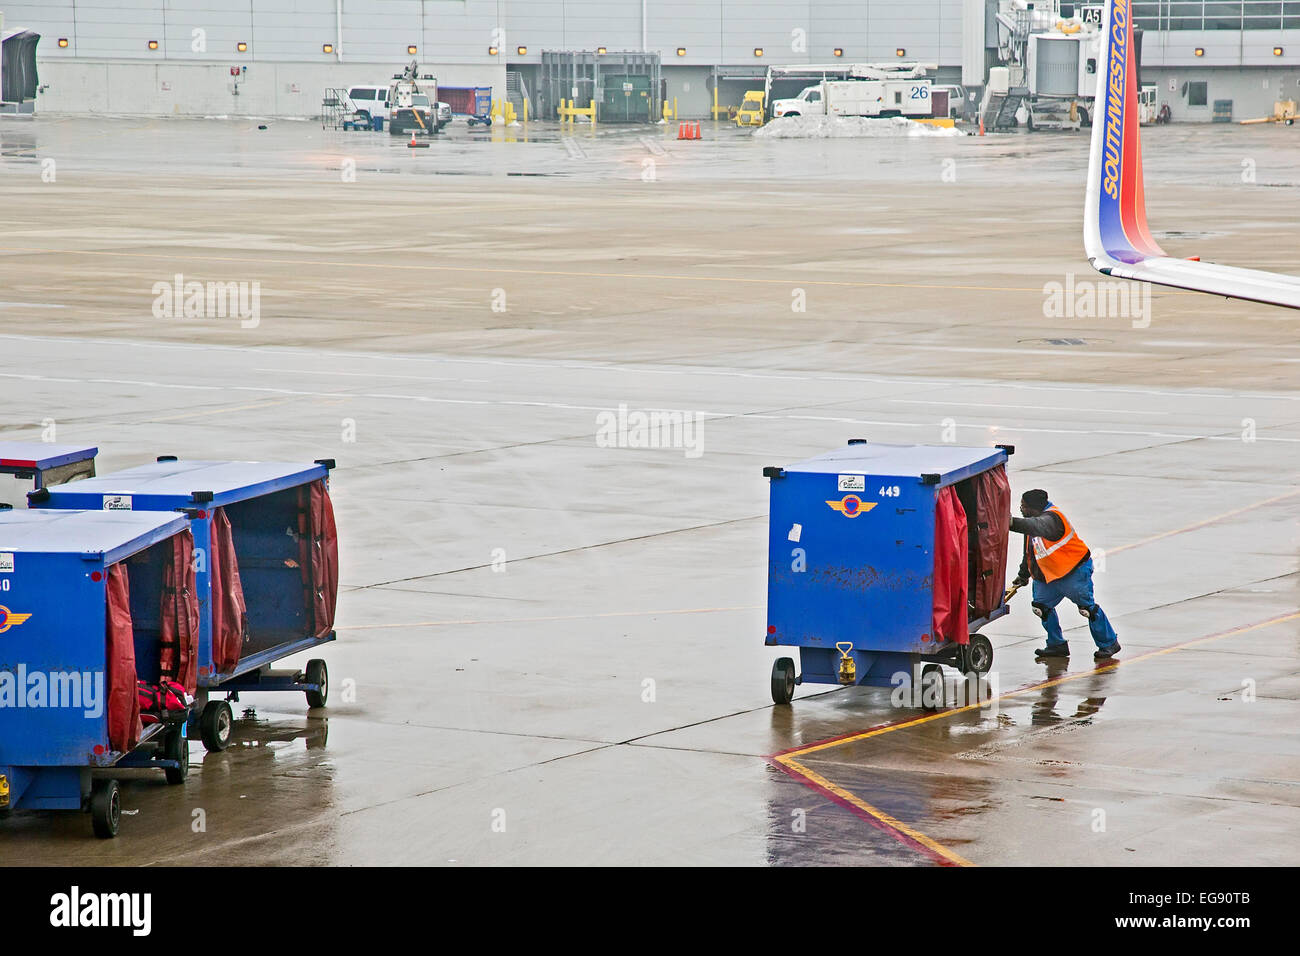 Chicago, Illinois - A member of the Southwest Airlines ground crew pushes a luggage cart on the tarmac at Midway Airport. Stock Photo